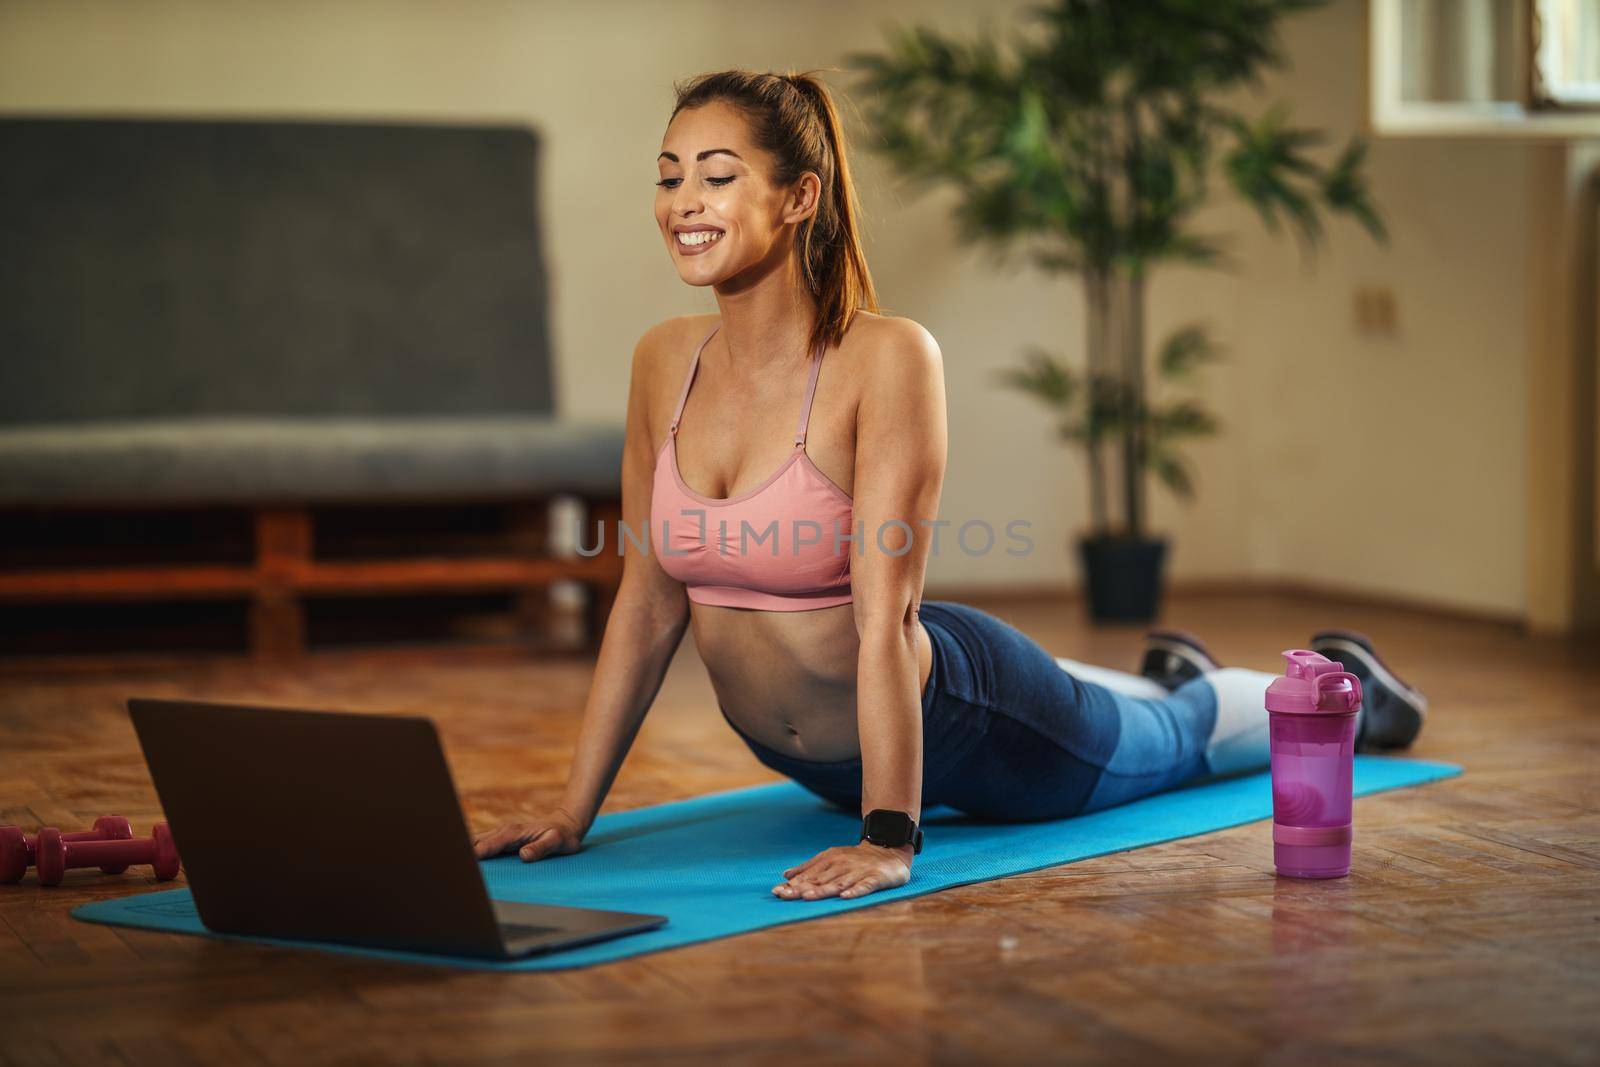 Young smiling woman is doing stretching exercises in the living room on floor mat at home, looking at the laptop, in morning sunshine.